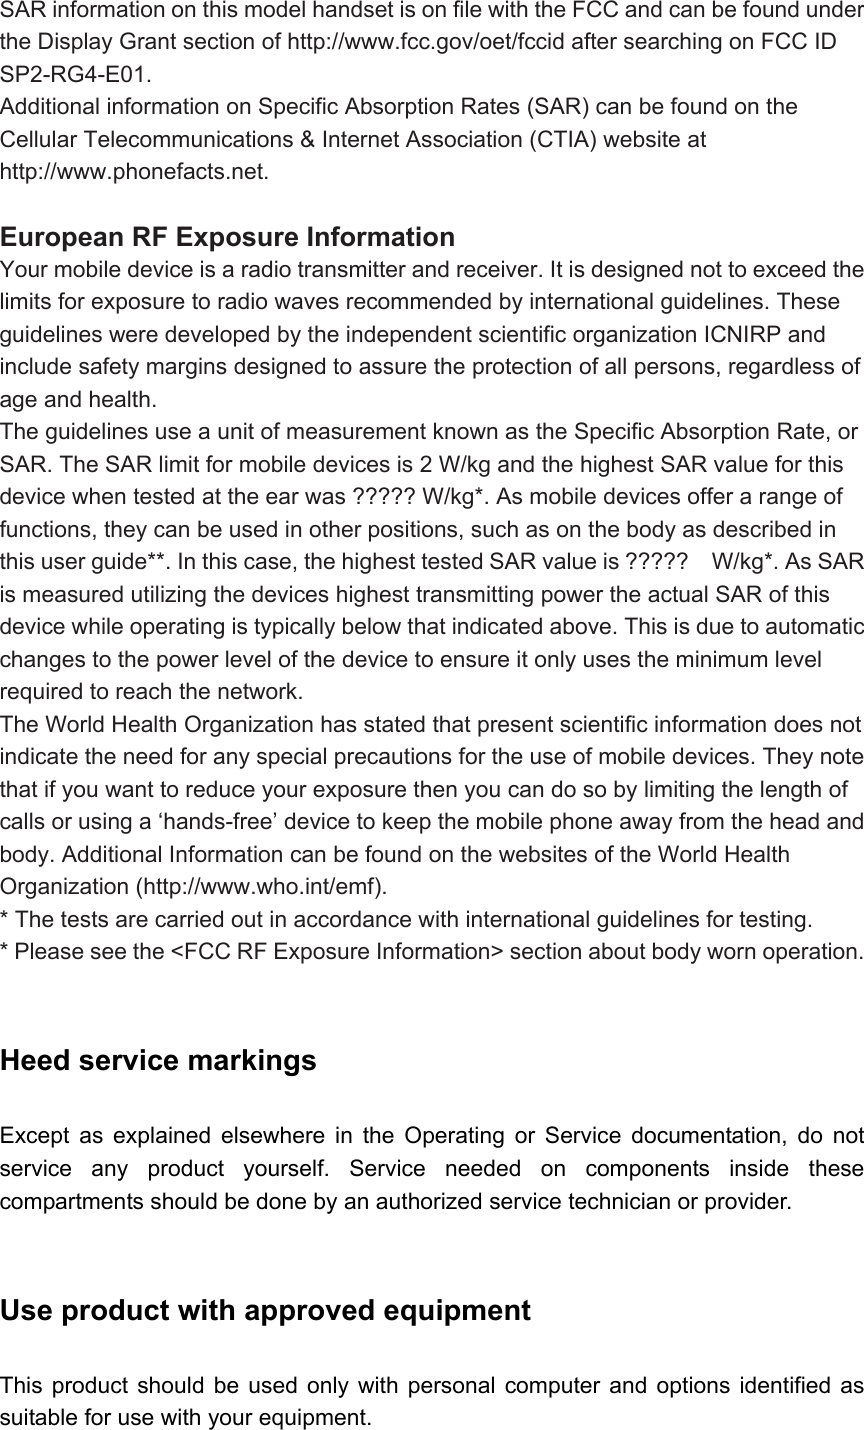 SAR information on this model handset is on file with the FCC and can be found under the Display Grant section of http://www.fcc.gov/oet/fccid after searching on FCC ID SP2-RG4-E01. Additional information on Specific Absorption Rates (SAR) can be found on the Cellular Telecommunications &amp; Internet Association (CTIA) website at http://www.phonefacts.net.  European RF Exposure Information Your mobile device is a radio transmitter and receiver. It is designed not to exceed the limits for exposure to radio waves recommended by international guidelines. These guidelines were developed by the independent scientific organization ICNIRP and include safety margins designed to assure the protection of all persons, regardless of age and health. The guidelines use a unit of measurement known as the Specific Absorption Rate, or SAR. The SAR limit for mobile devices is 2 W/kg and the highest SAR value for this device when tested at the ear was ????? W/kg*. As mobile devices offer a range of functions, they can be used in other positions, such as on the body as described in this user guide**. In this case, the highest tested SAR value is ?????    W/kg*. As SAR is measured utilizing the devices highest transmitting power the actual SAR of this device while operating is typically below that indicated above. This is due to automatic changes to the power level of the device to ensure it only uses the minimum level required to reach the network. The World Health Organization has stated that present scientific information does not indicate the need for any special precautions for the use of mobile devices. They note that if you want to reduce your exposure then you can do so by limiting the length of calls or using a ‘hands-free’ device to keep the mobile phone away from the head and body. Additional Information can be found on the websites of the World Health Organization (http://www.who.int/emf). * The tests are carried out in accordance with international guidelines for testing. * Please see the &lt;FCC RF Exposure Information&gt; section about body worn operation.  Heed service markings   Except as explained elsewhere in the Operating or Service documentation, do not service any product yourself. Service needed on components inside these compartments should be done by an authorized service technician or provider.  Use product with approved equipment   This product should be used only with personal computer and options identified as suitable for use with your equipment. 